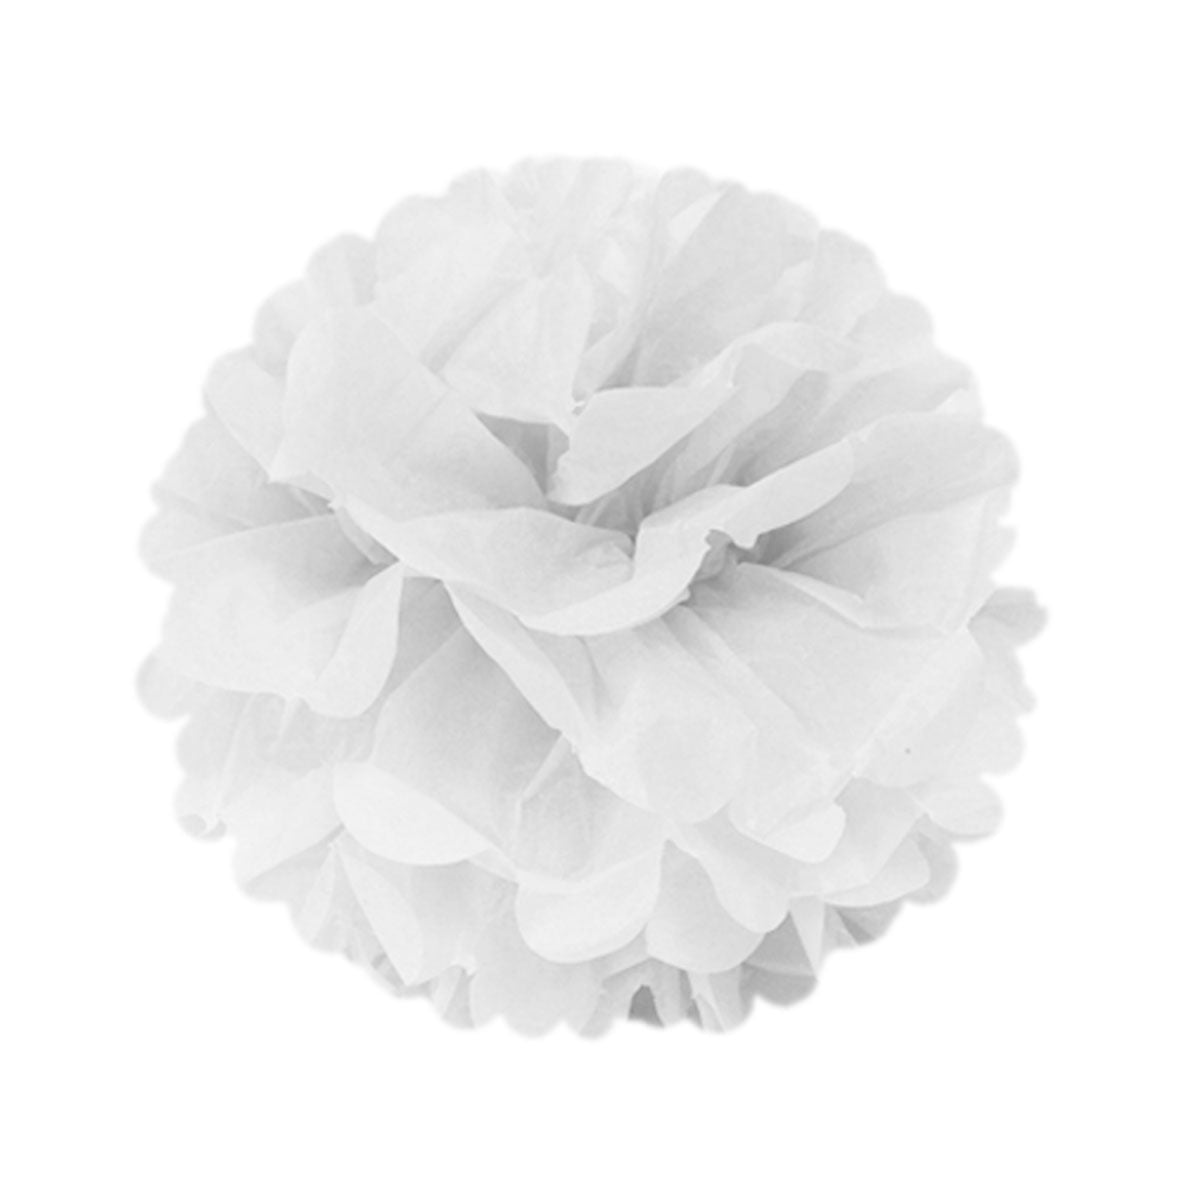 Wrapables 14" Set of 3 Tissue Pom Poms Party Decorations